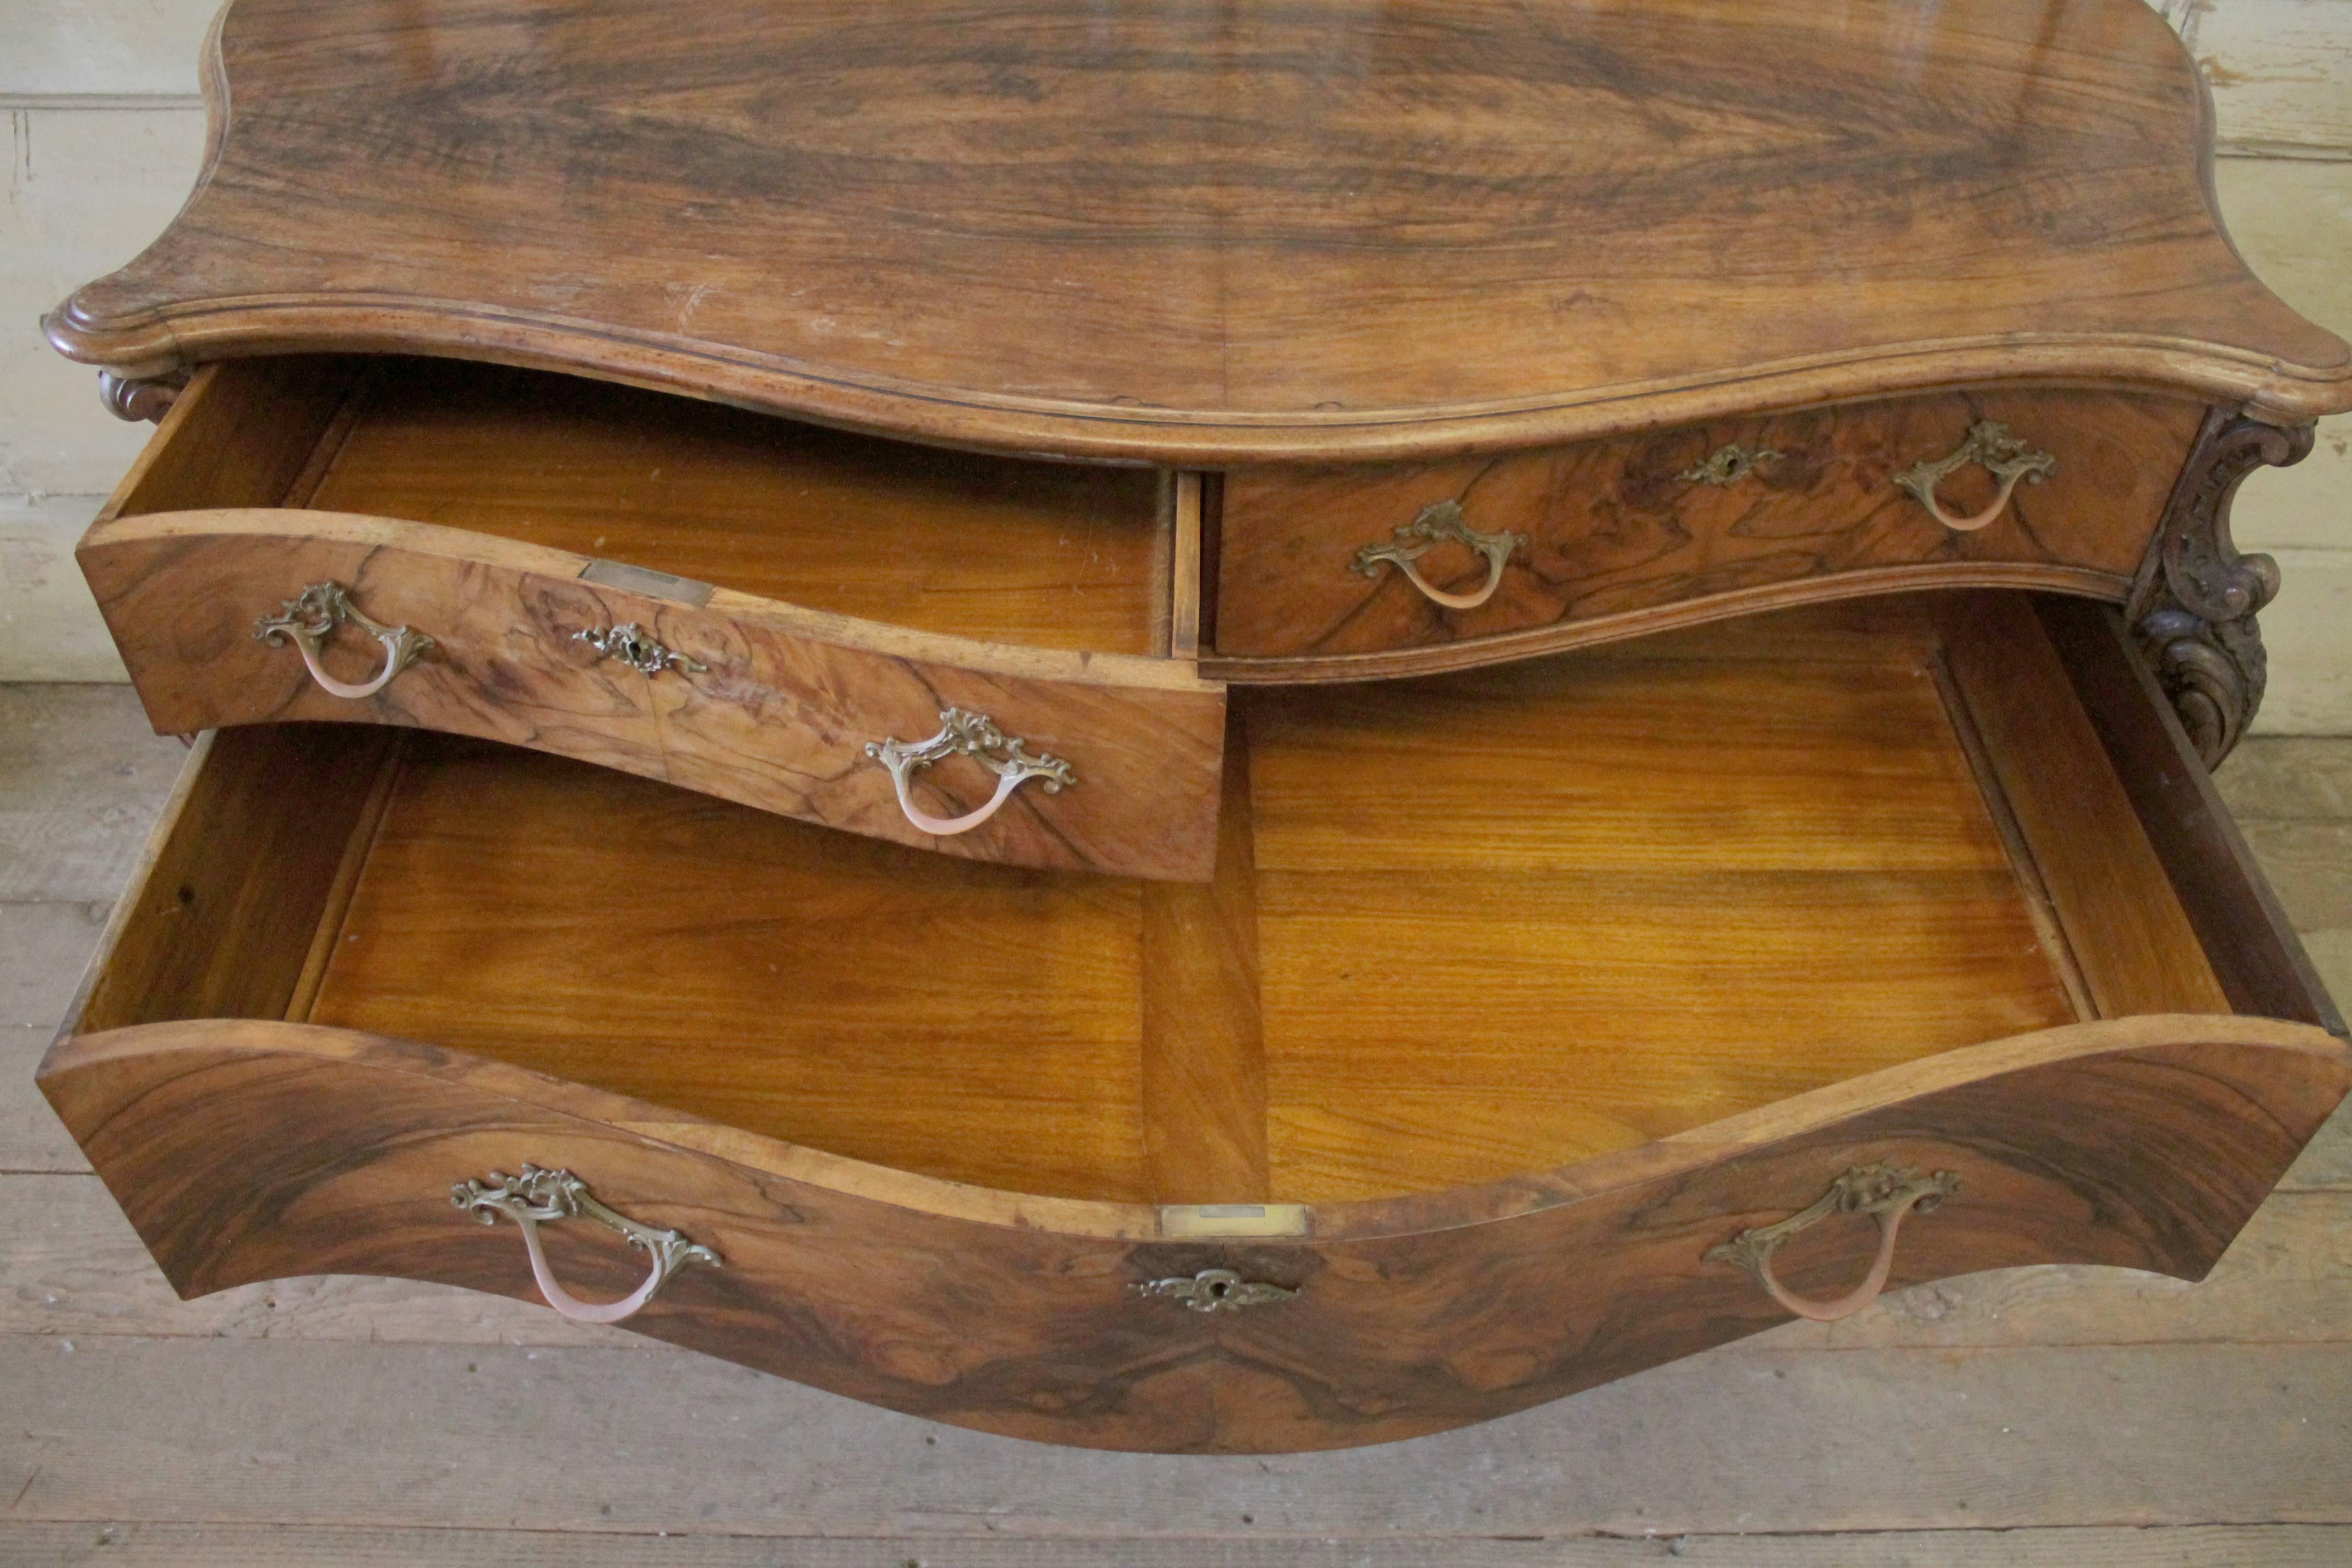 Carved 19th Century Chest of Drawers in BookMatch Crotch English Walnut